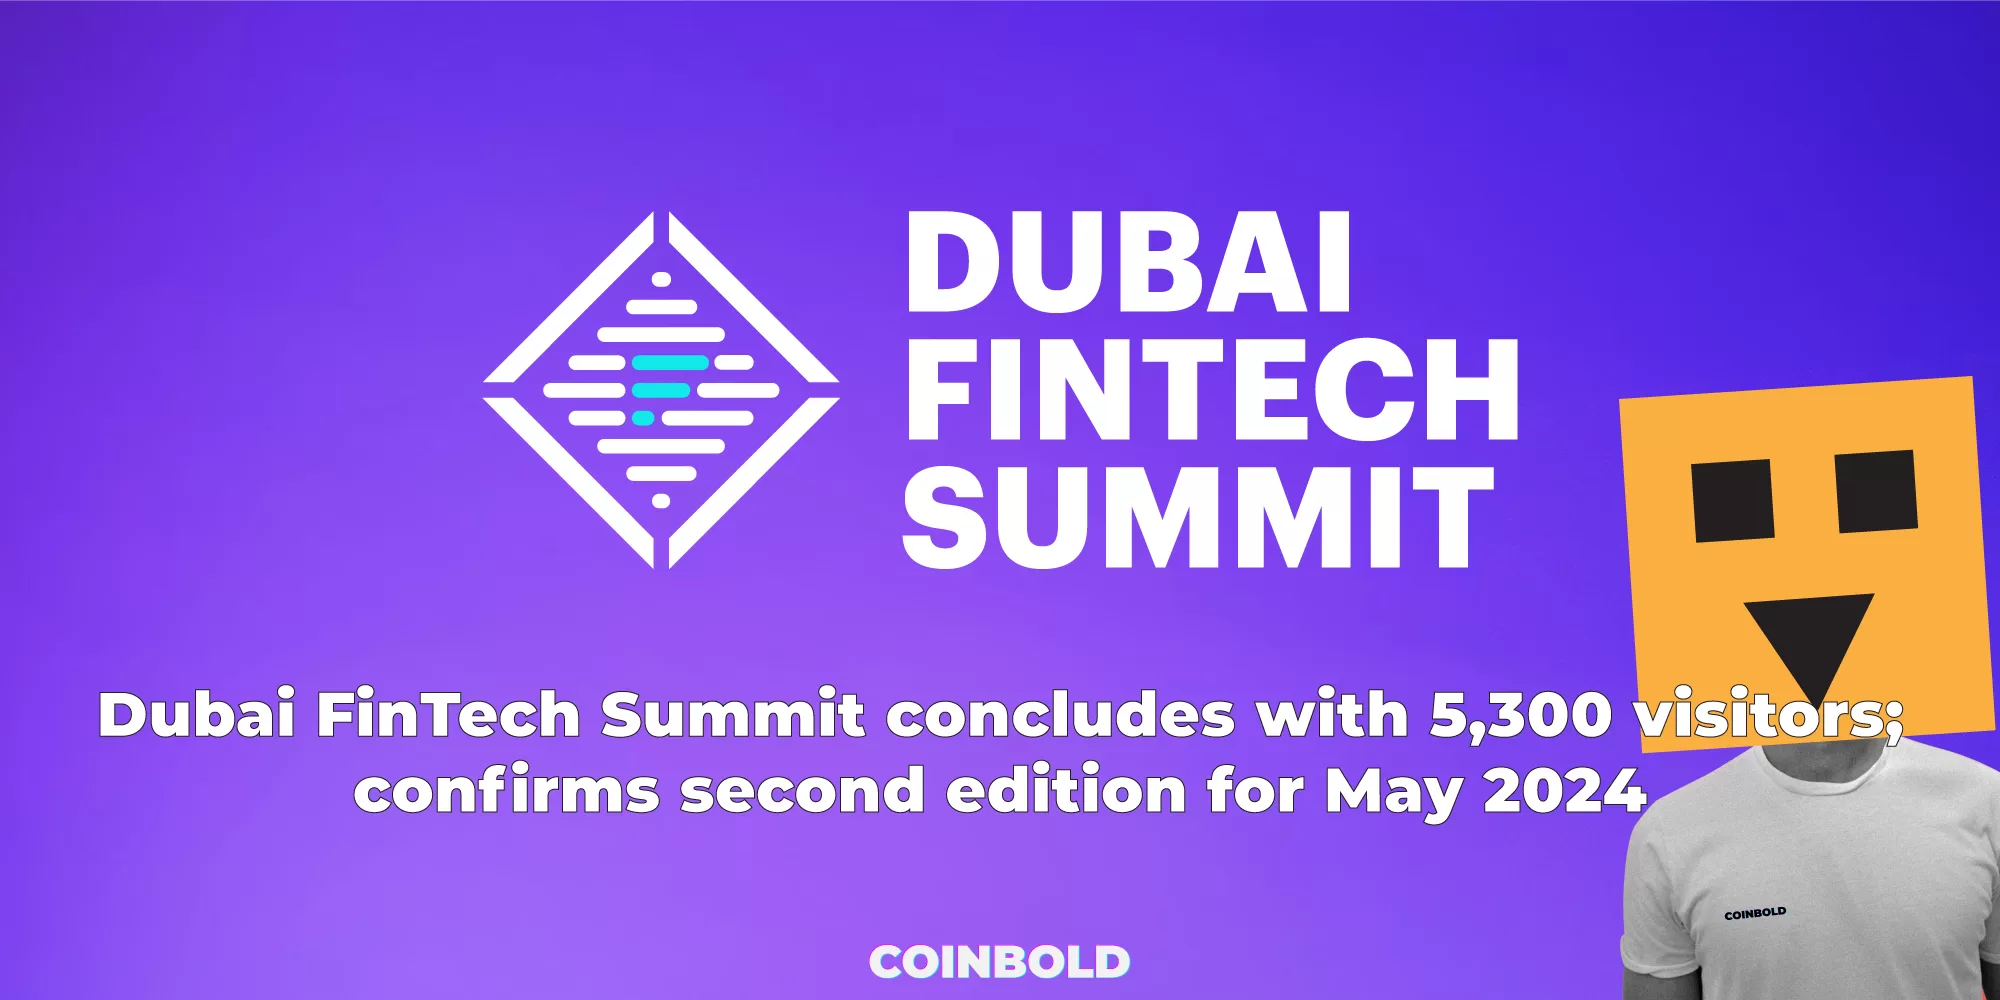 Dubai FinTech Summit concludes with 5300 visitors confirms second edition for May 2024 jpg